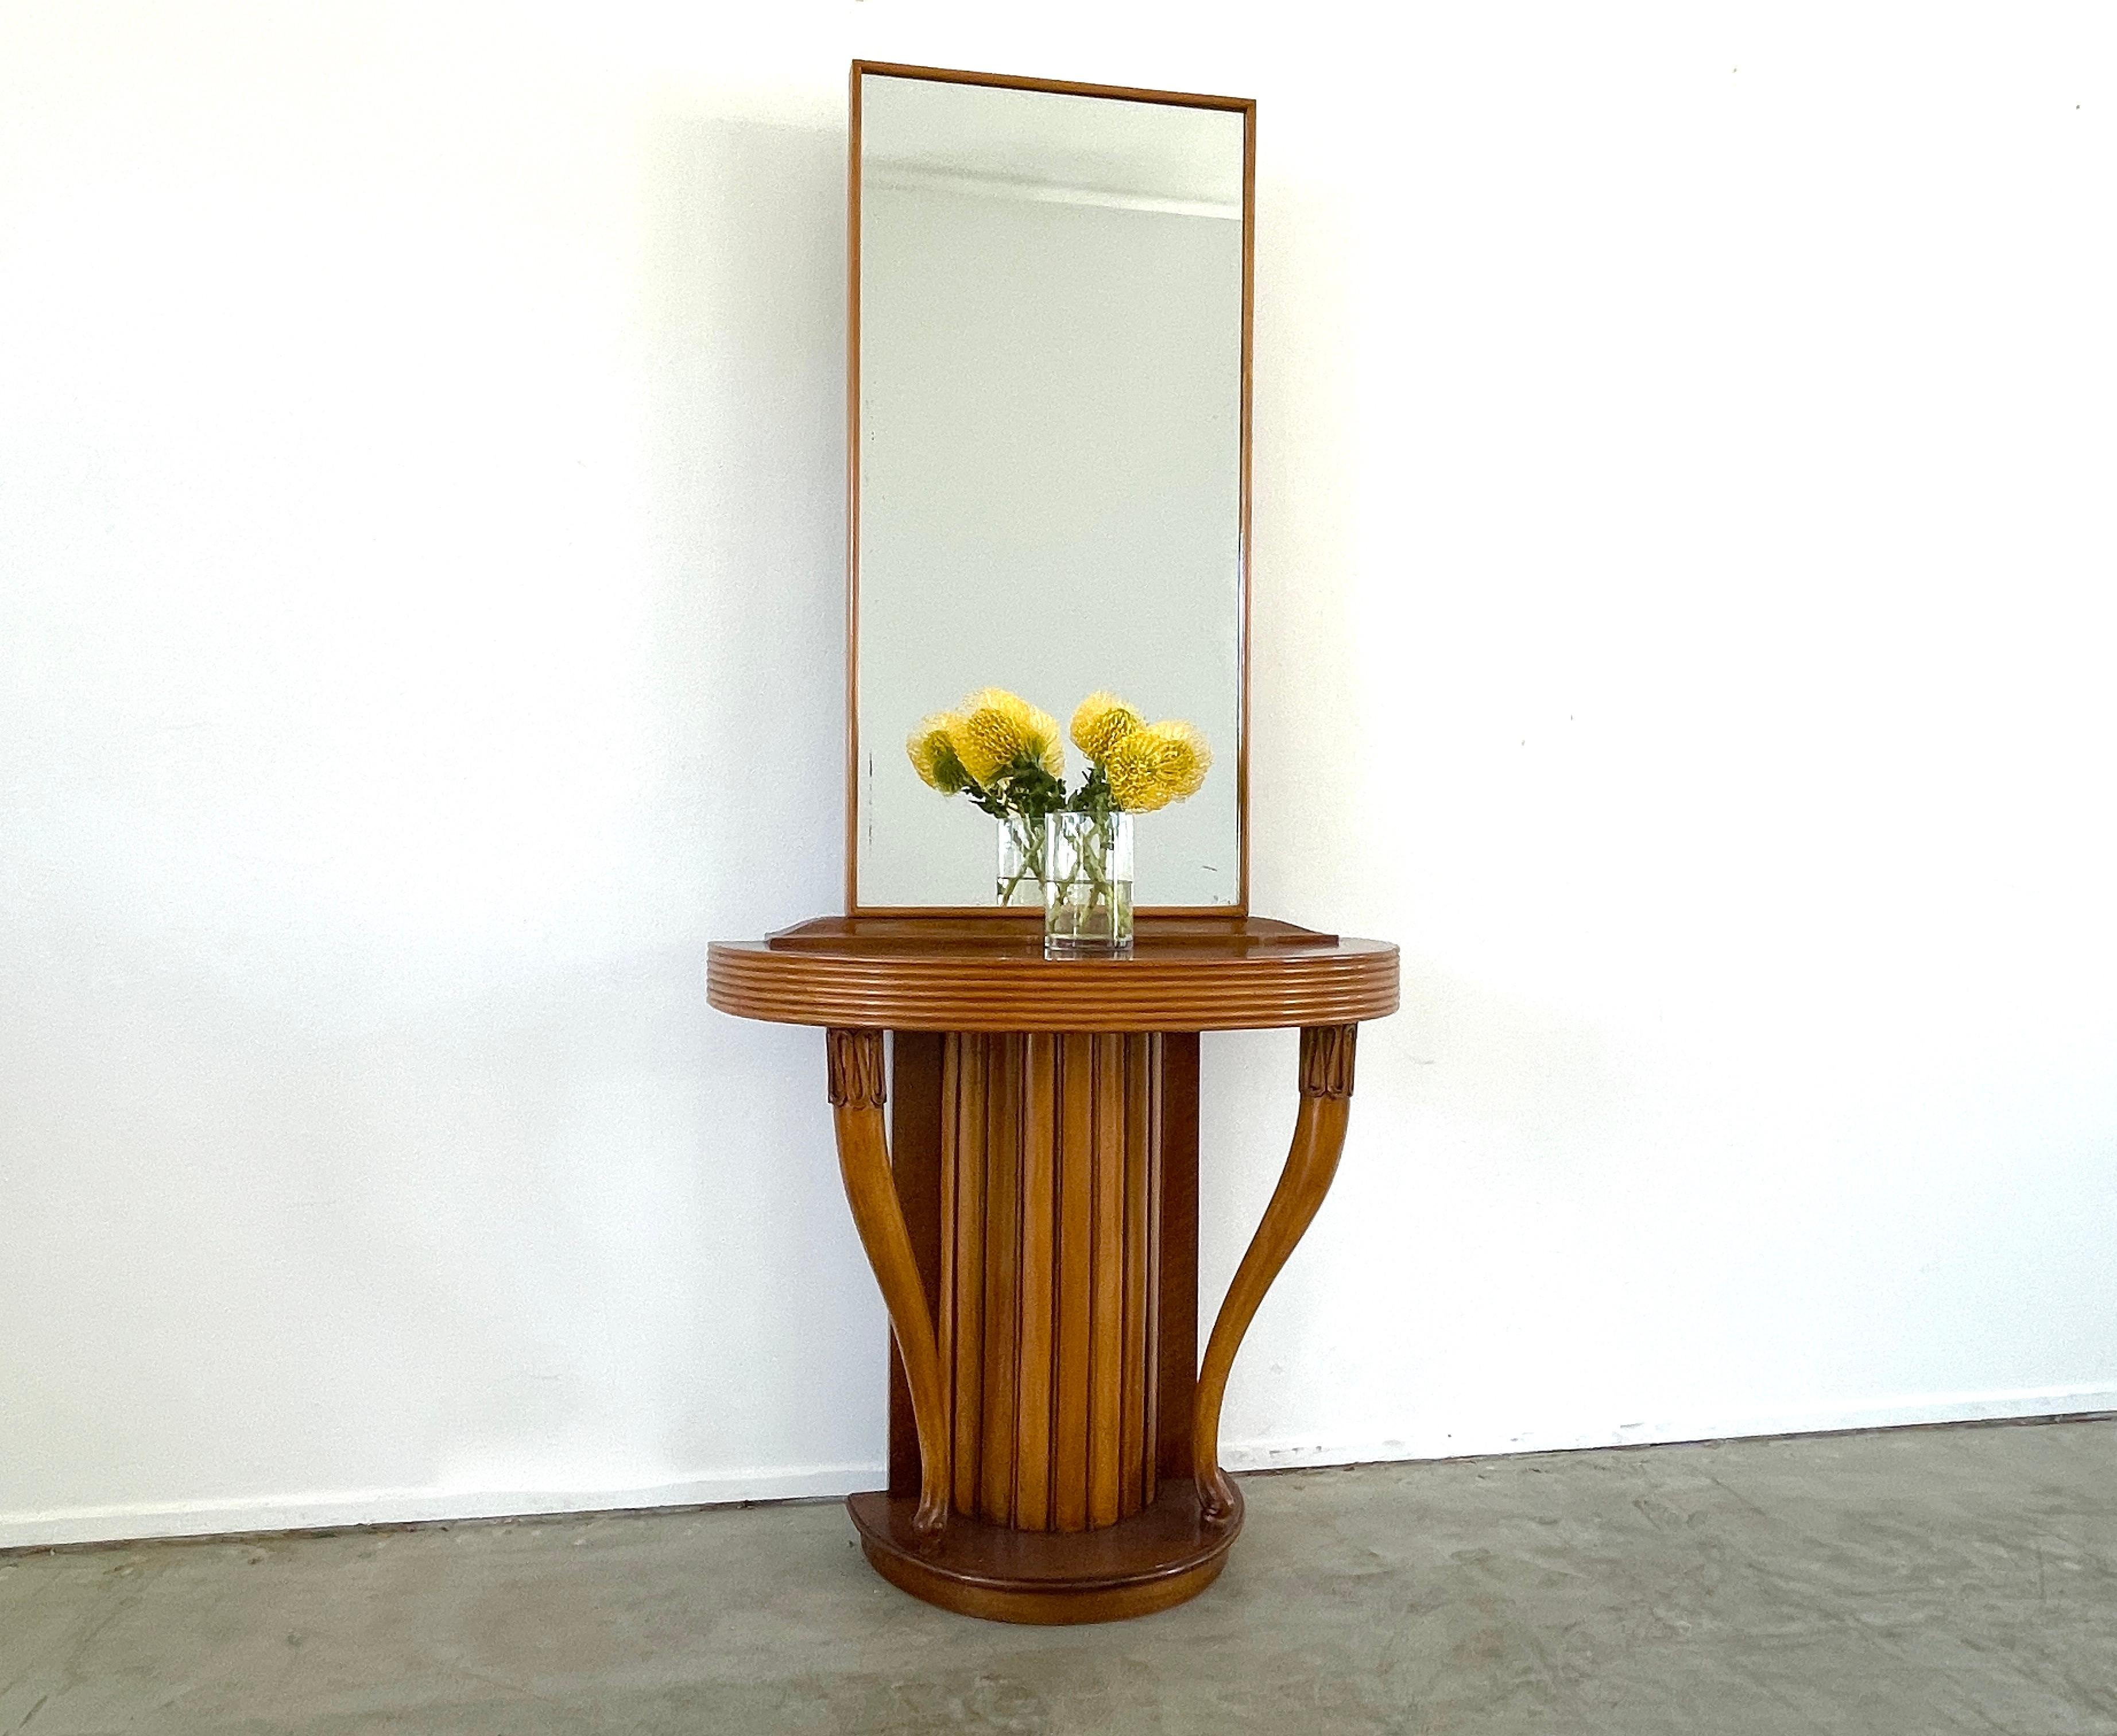 Osvaldo Borsani curved console with attached mirror circa 1940s
Beautiful curved shape with slatted maple and mahogany wood 
Great original patina.
 